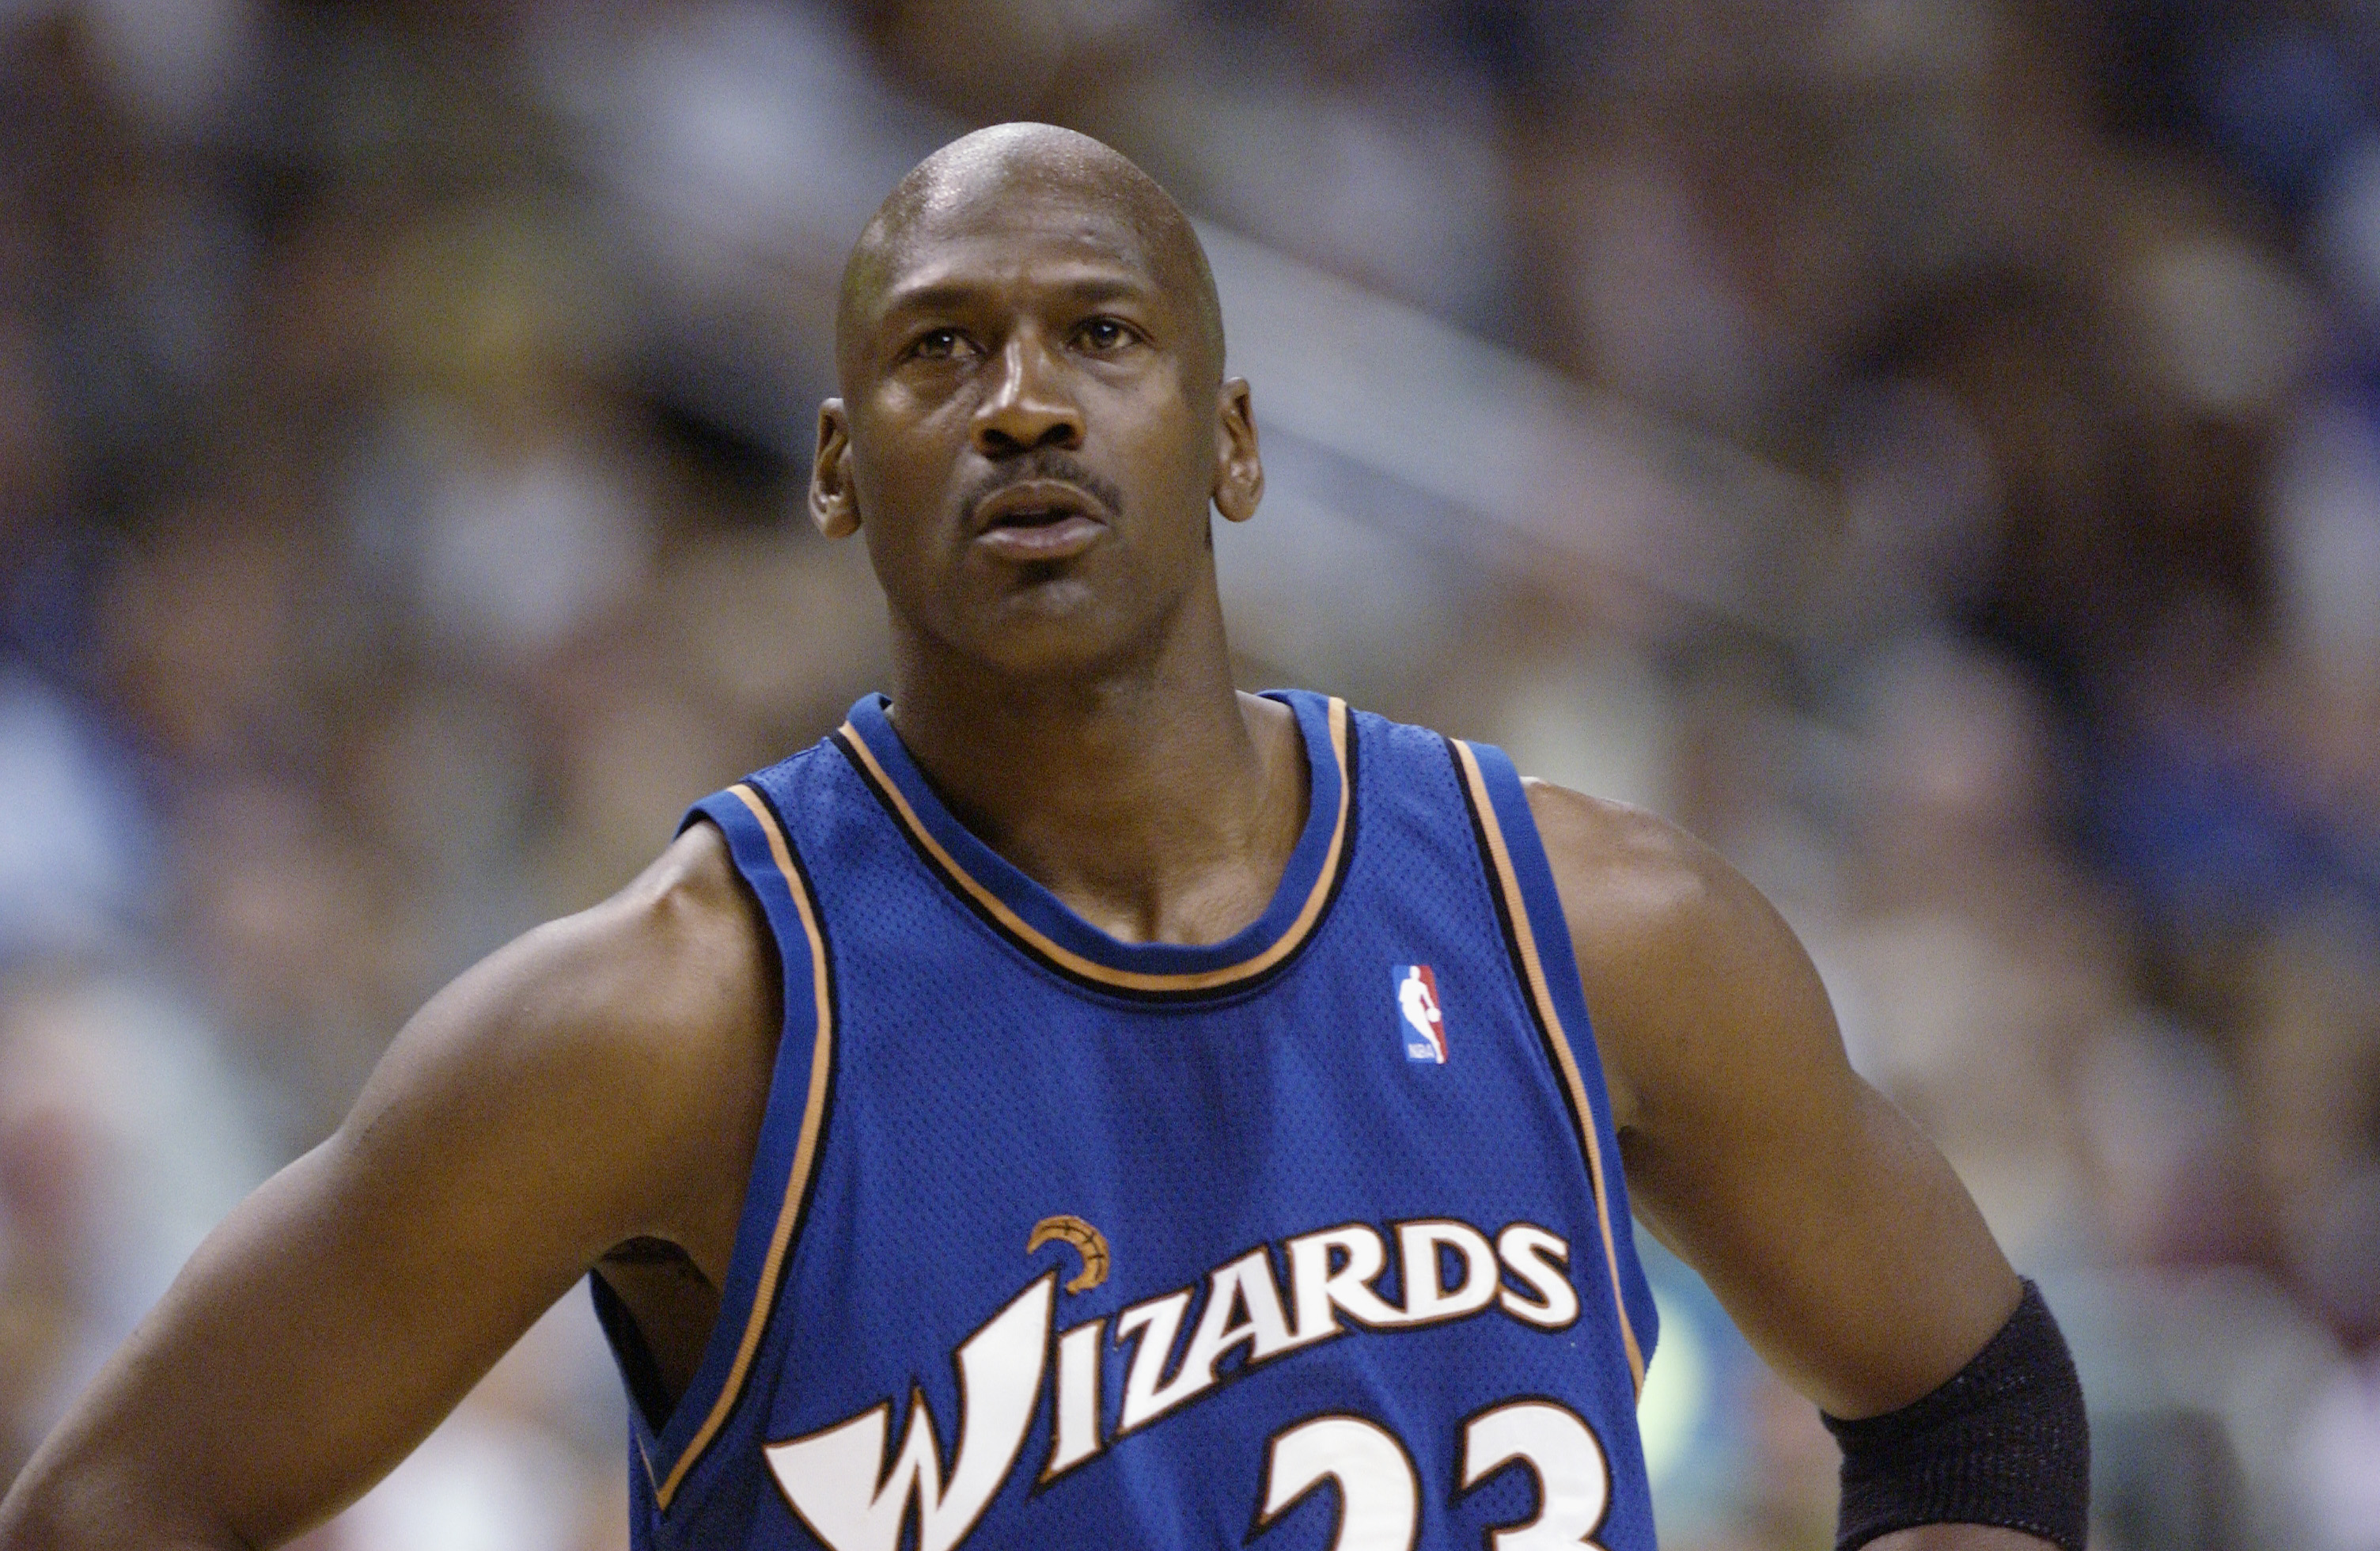 The Final Jersey Michael Jordan Ever Wore in an NBA Game Just Sold for Over $500,000